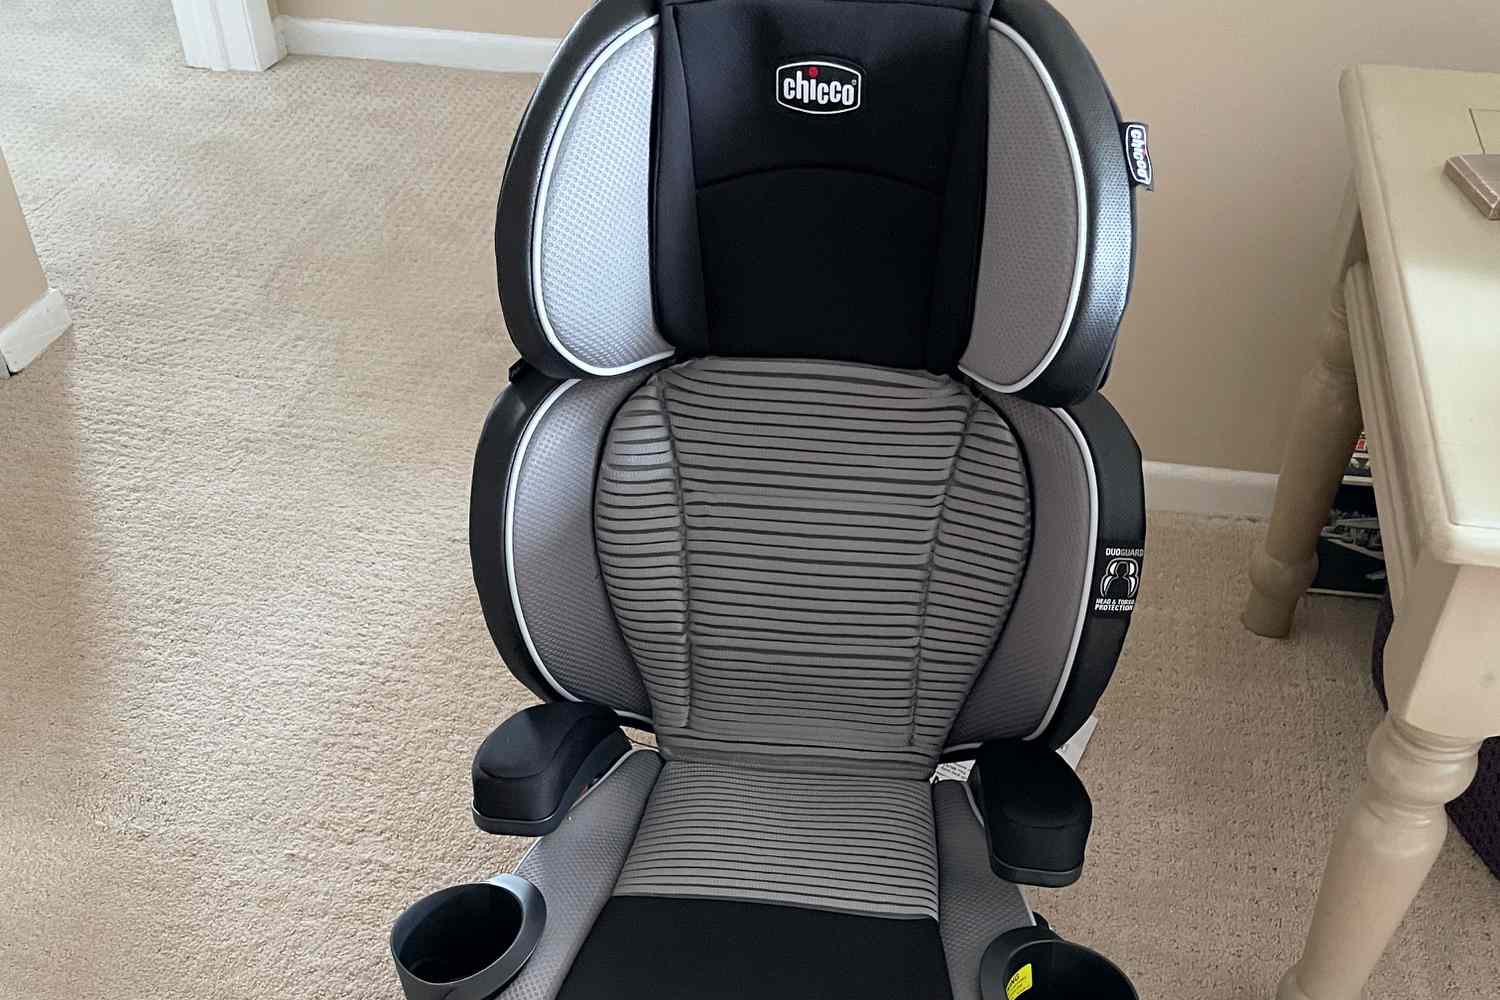 The Chicco KidFit Zip Air Plus 2-in-1 Belt-Positioning Booster Car Seat on a carpeted floor